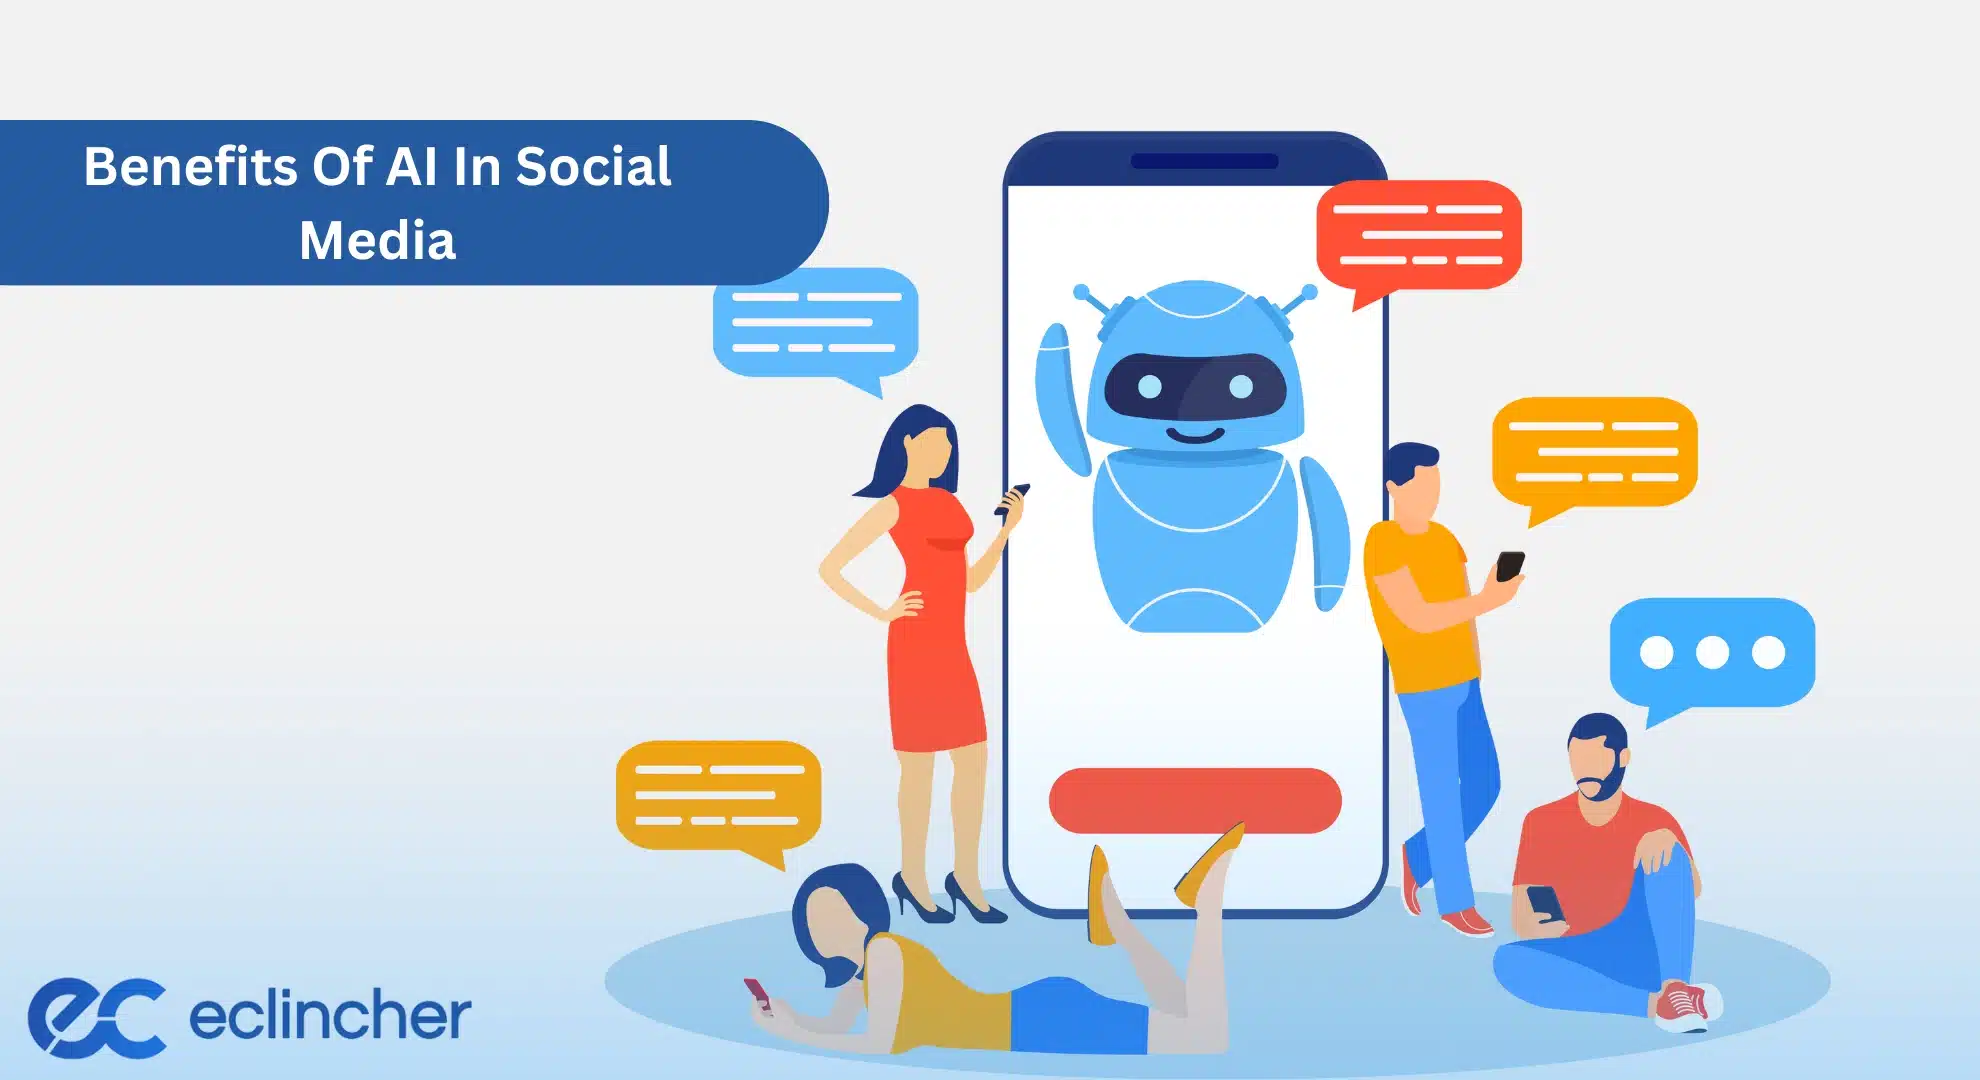 Benefits Of AI In Social Media